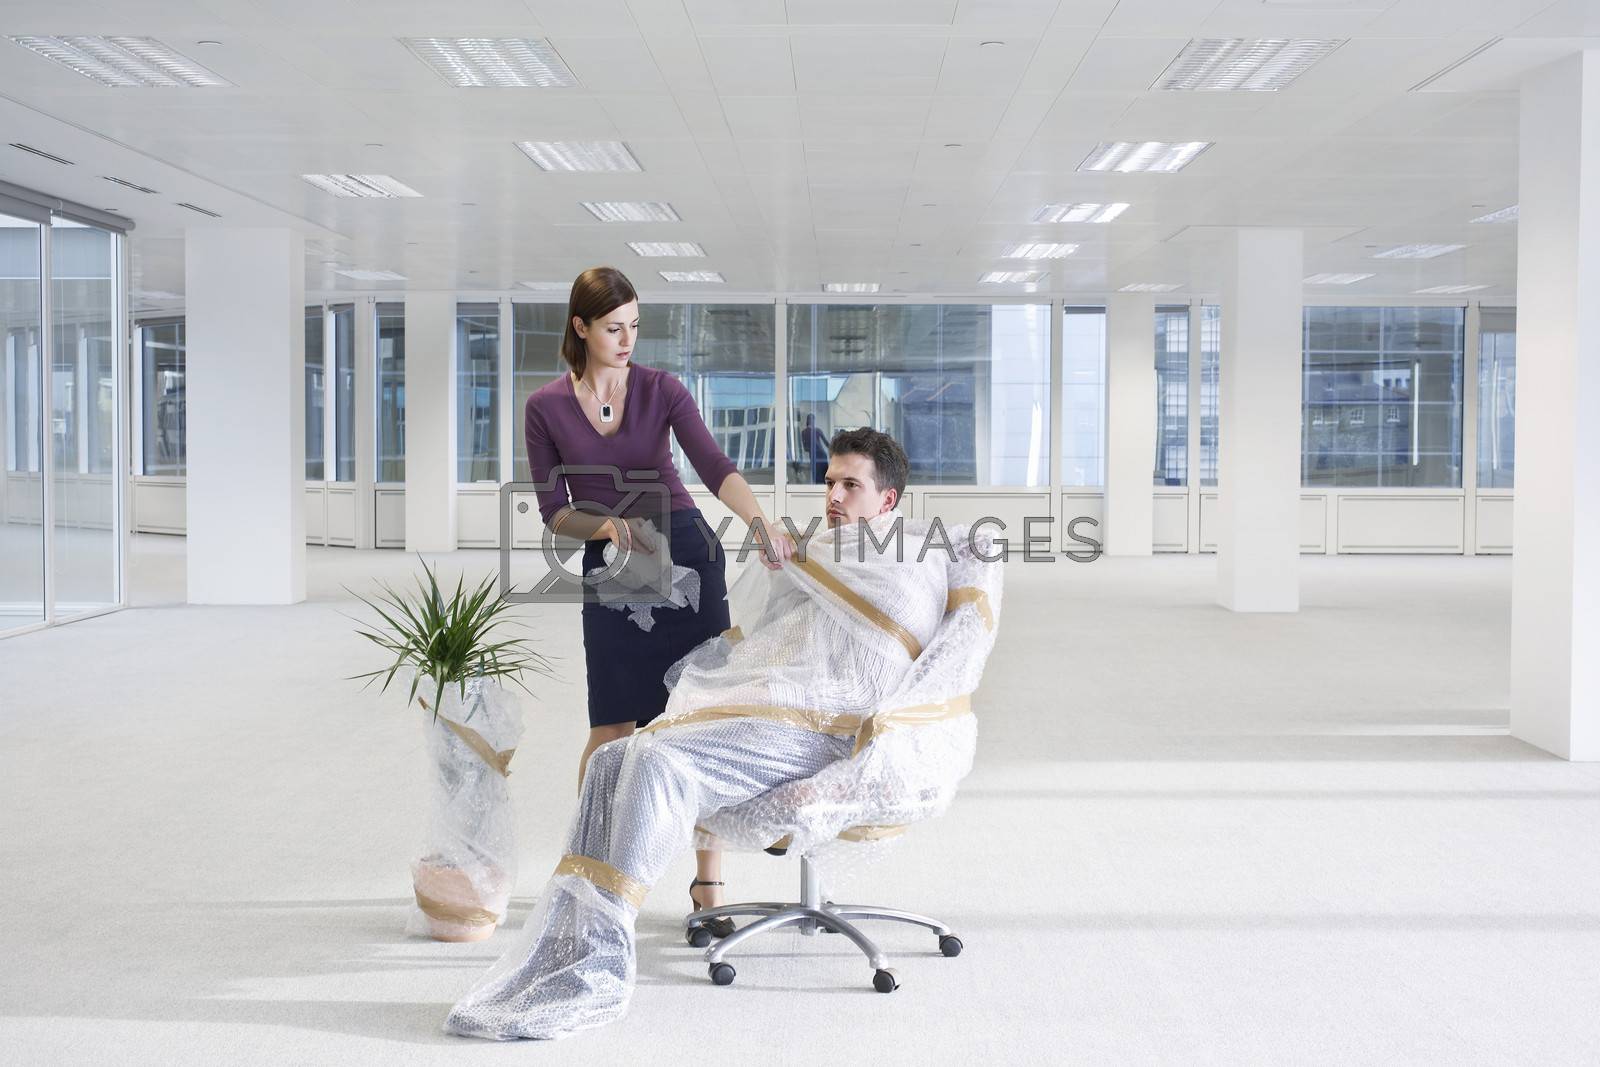 Royalty free image of Secretary unwrapping businessman on chair in empty office space by moodboard